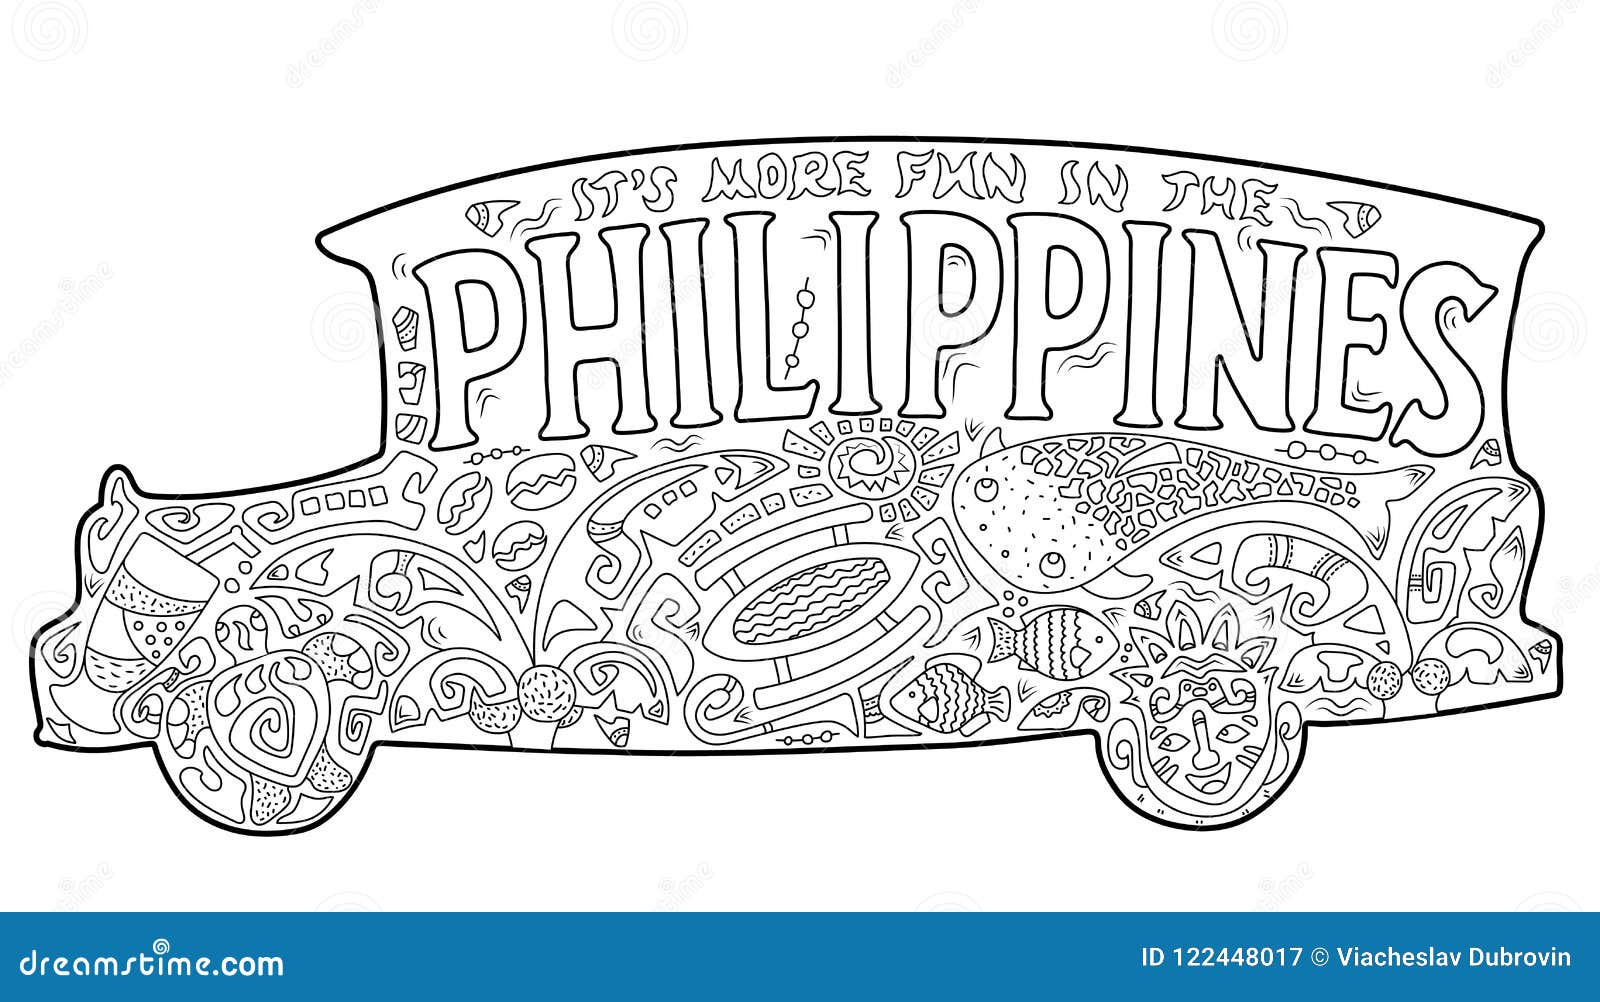 Download Jeepney Cartoons, Illustrations & Vector Stock Images ...